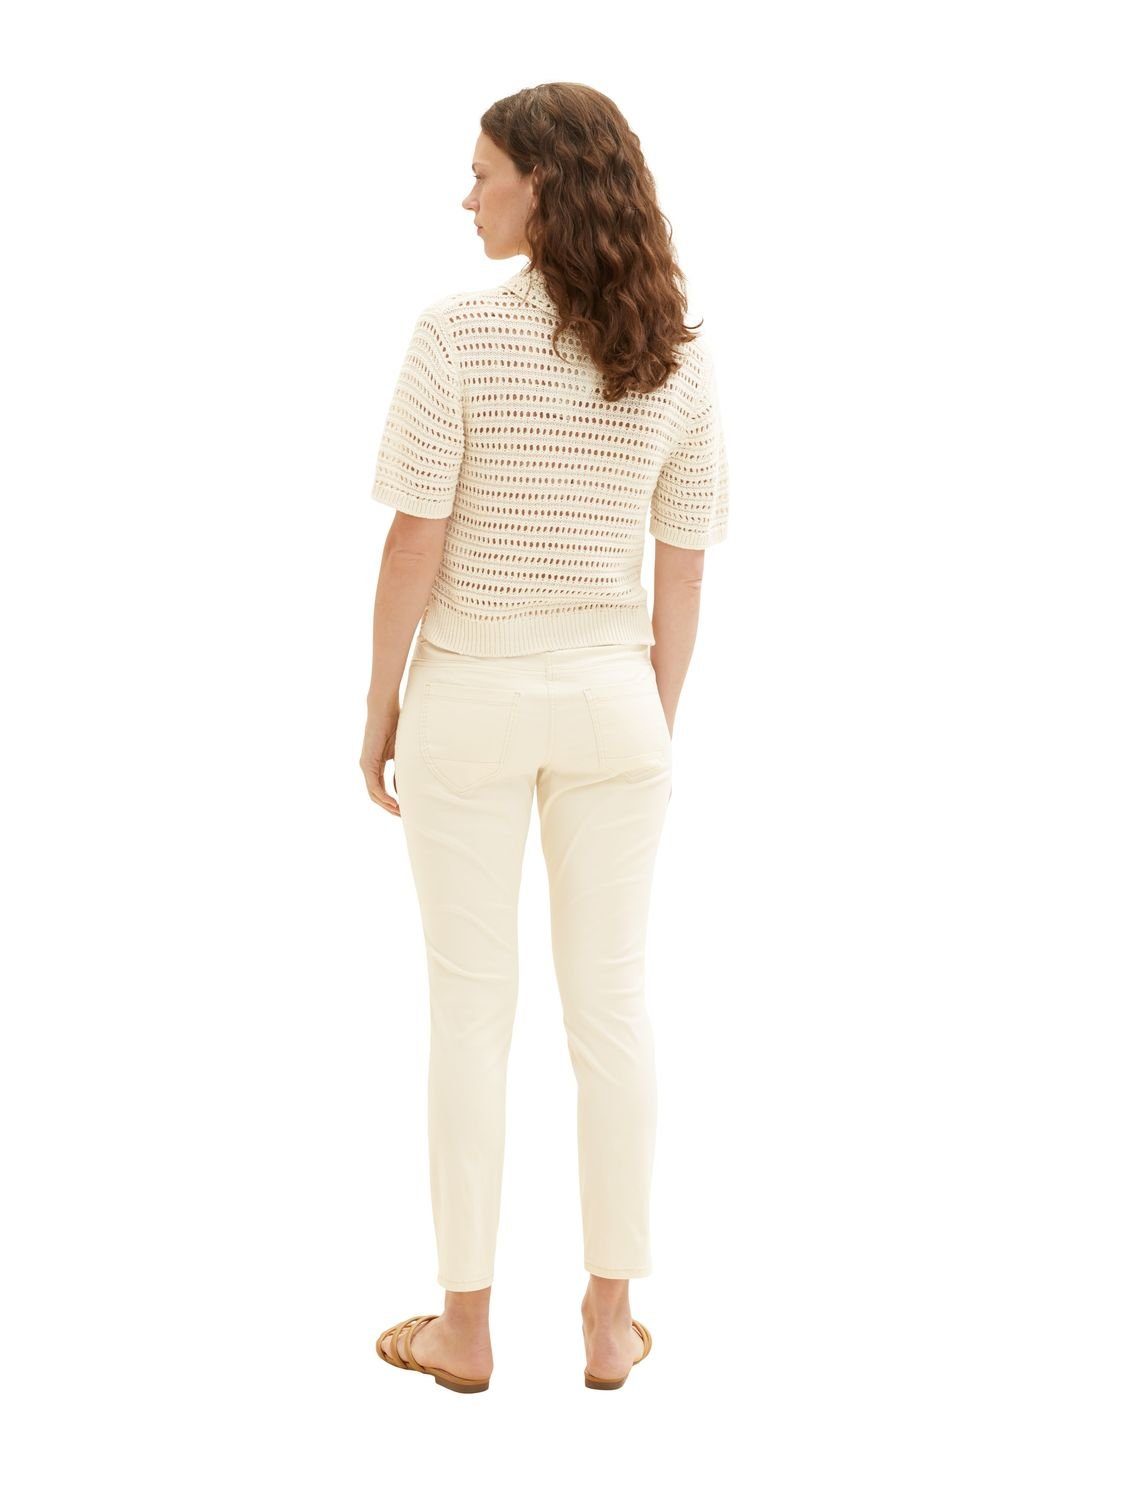 TOM TAILOR Relax-fit-Jeans 31649 RELAXED Ecru TAPERED Stretch Ivory mit